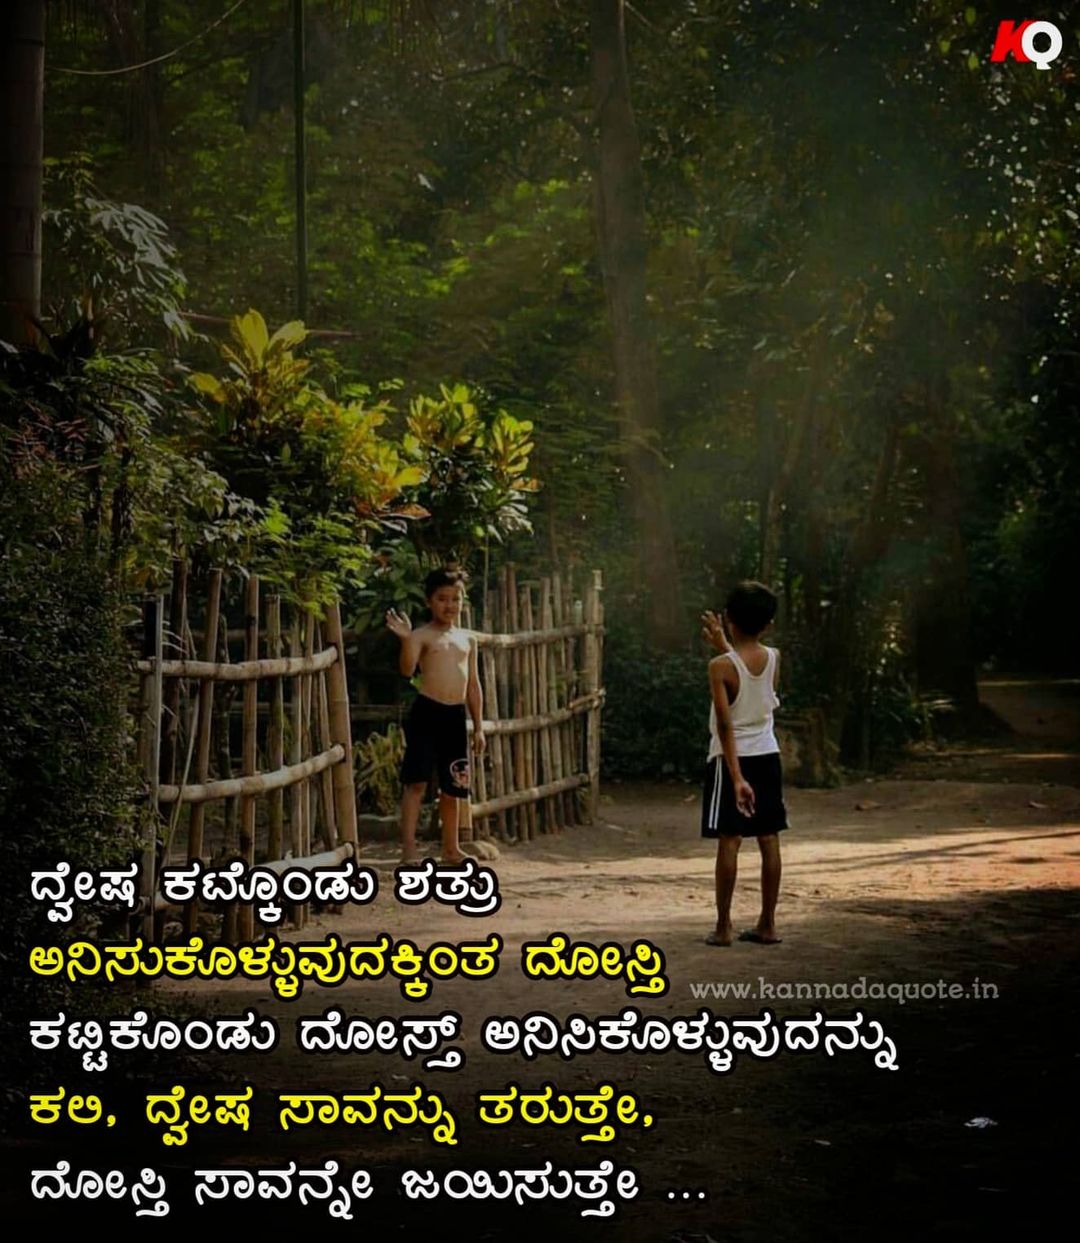 Real meaning of friendship quotes in Kannada